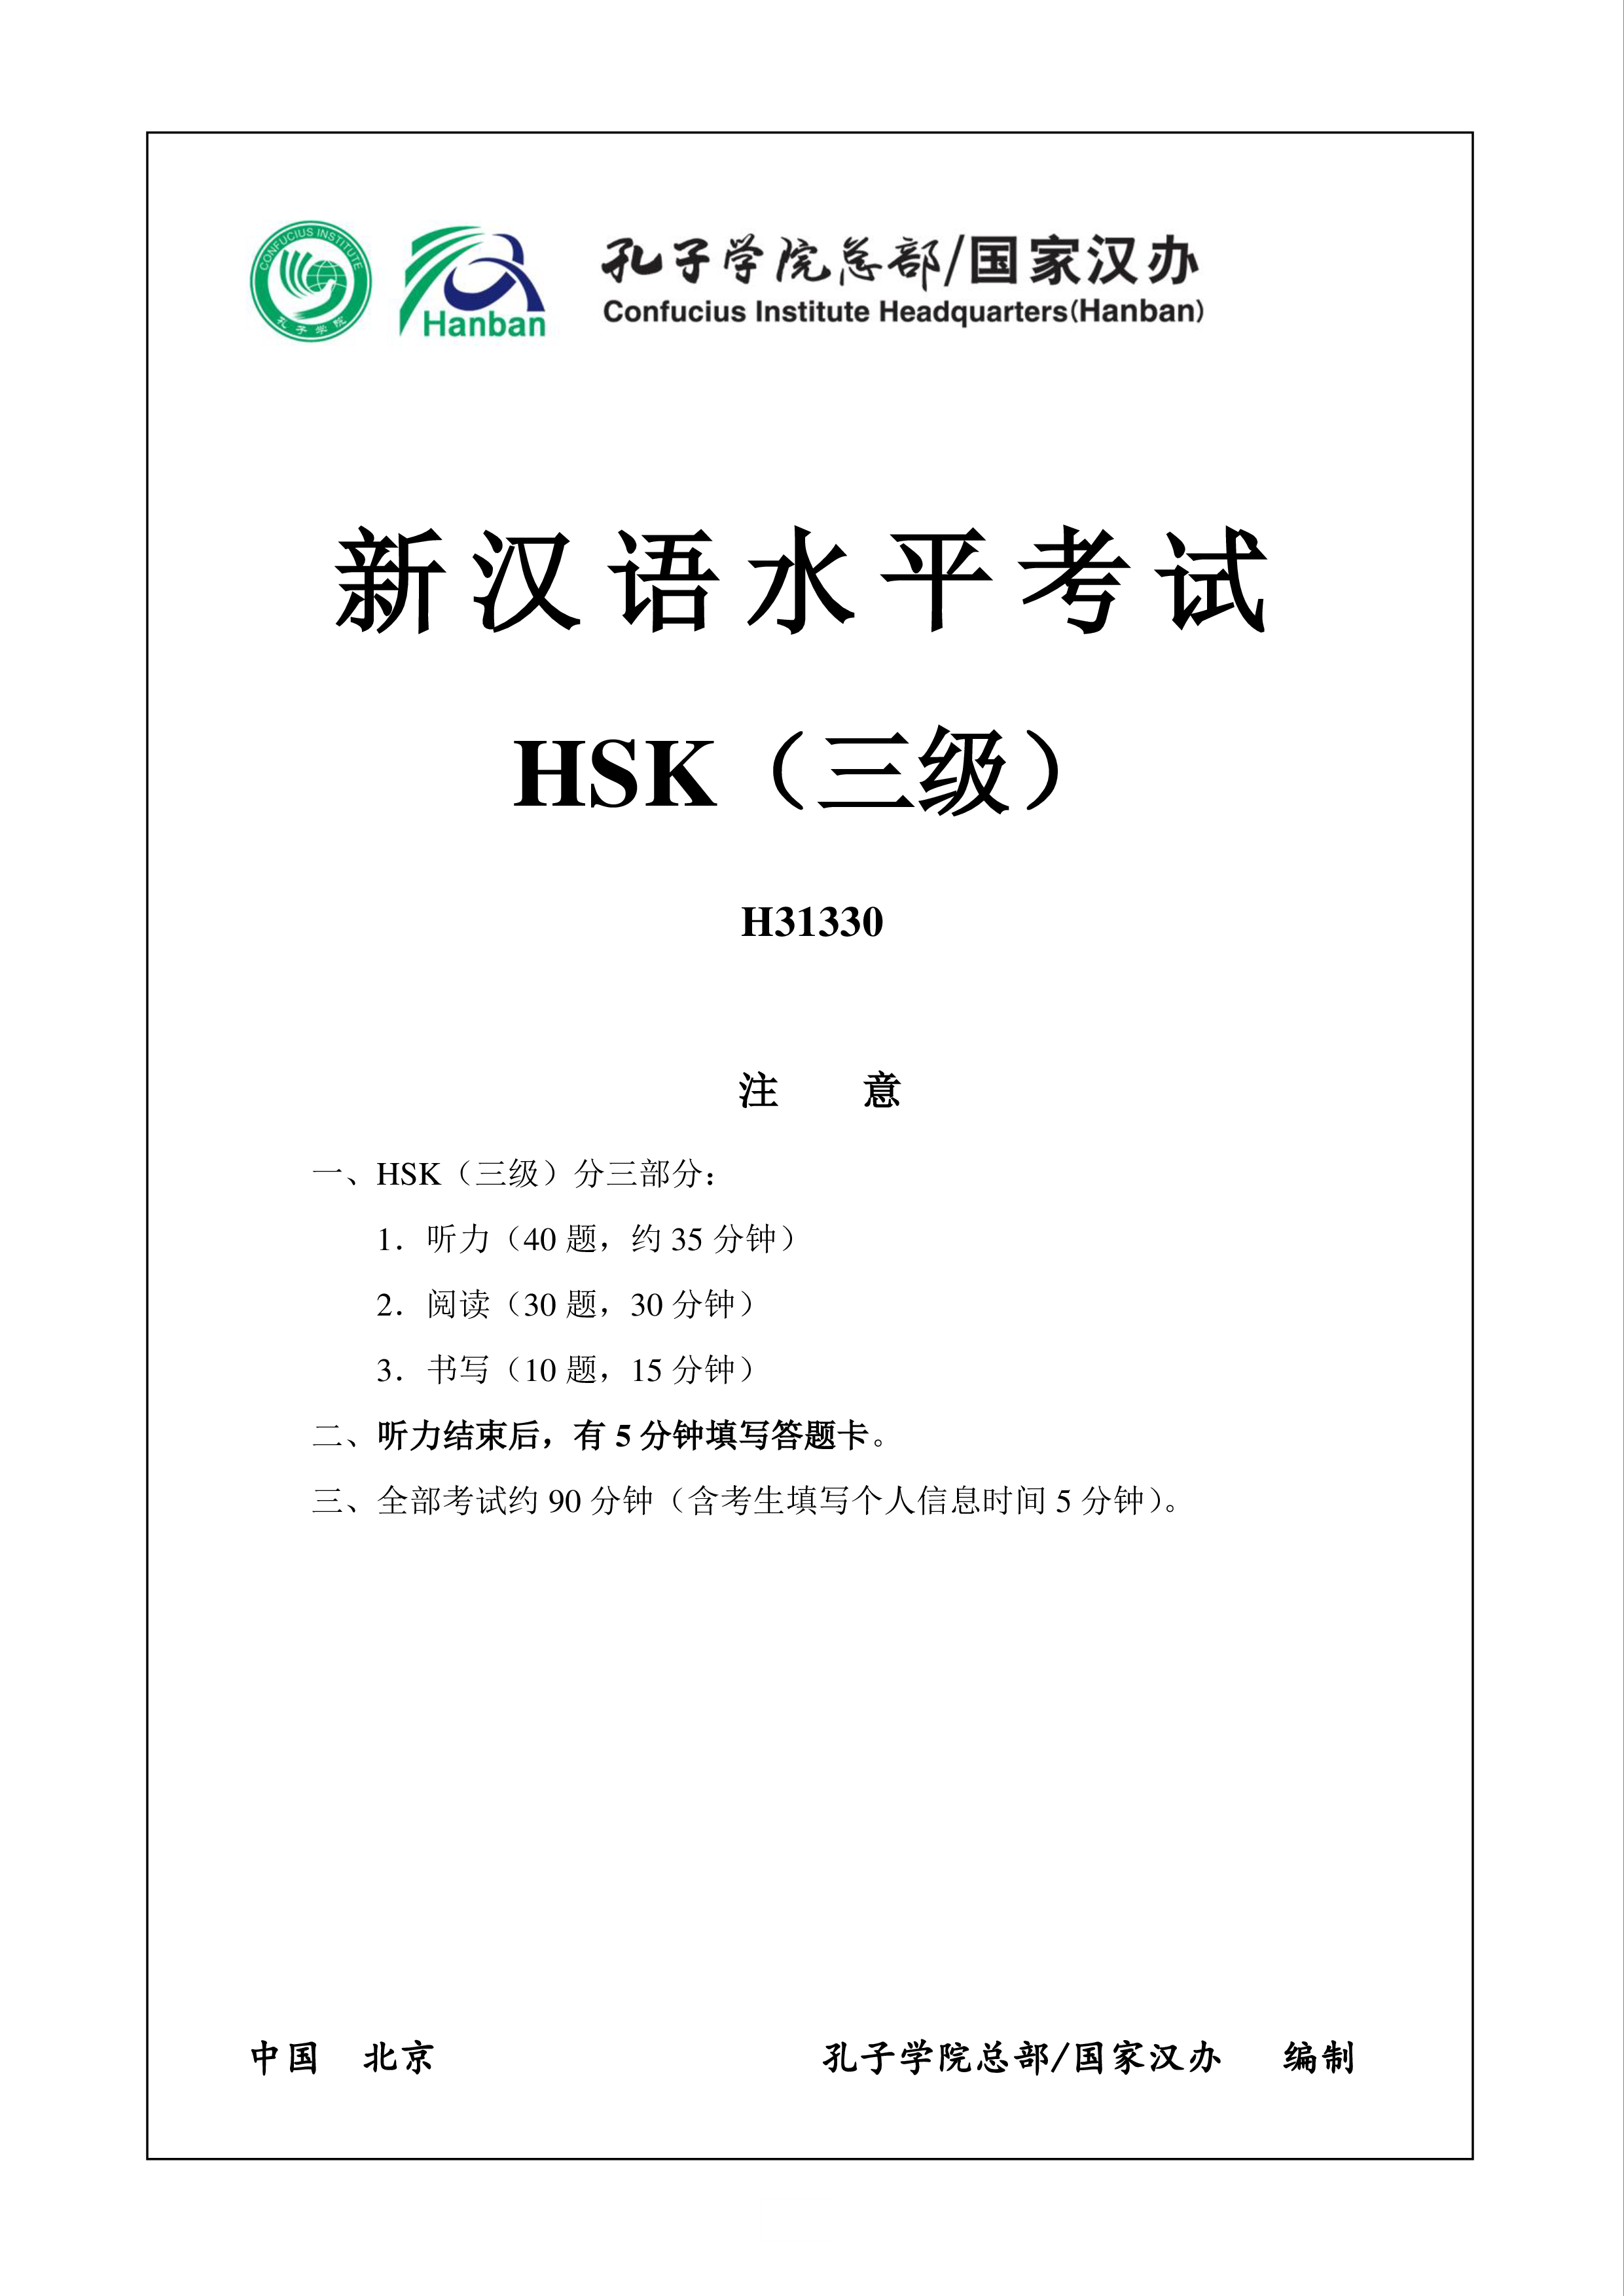 HSK3 Chinese Exam including Answers # HSK3 H31330 模板